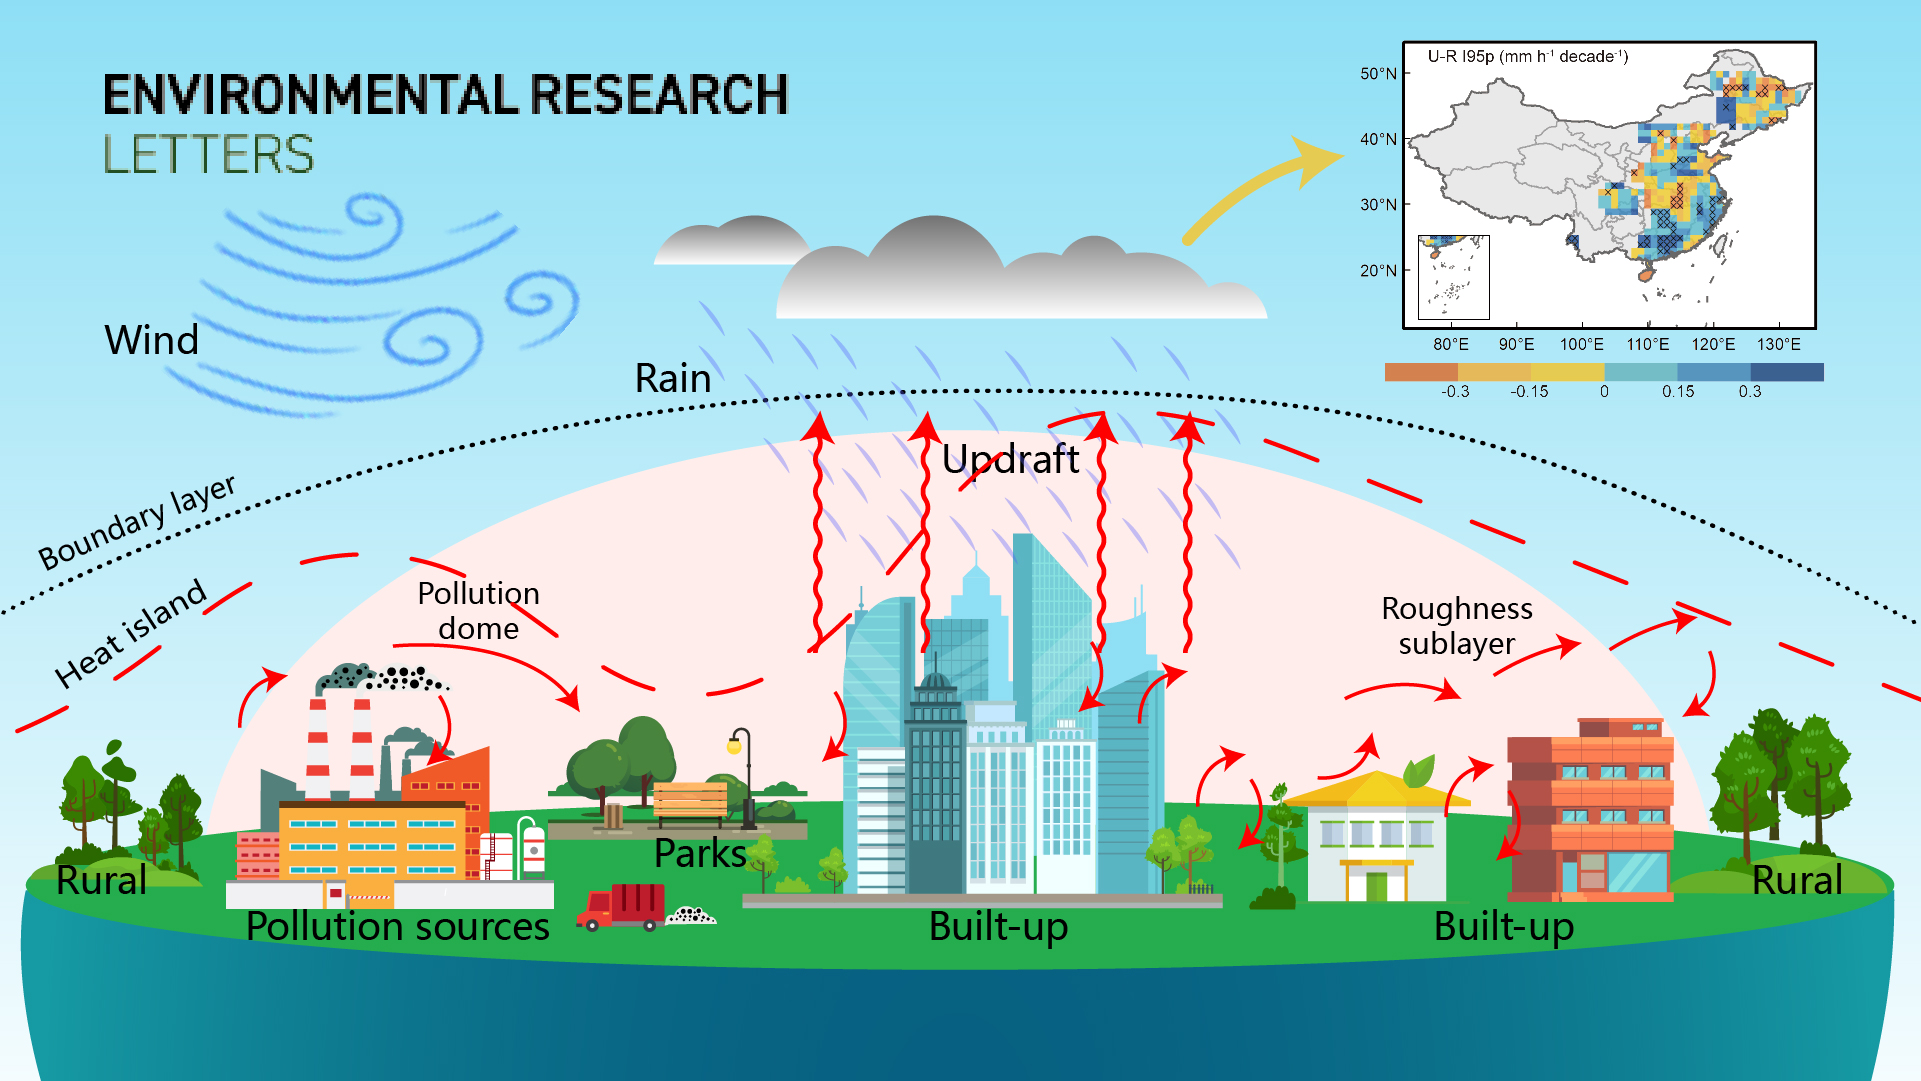 Researchers discover urbanization causes more heterogeneous spatial patterns over China during rainy season